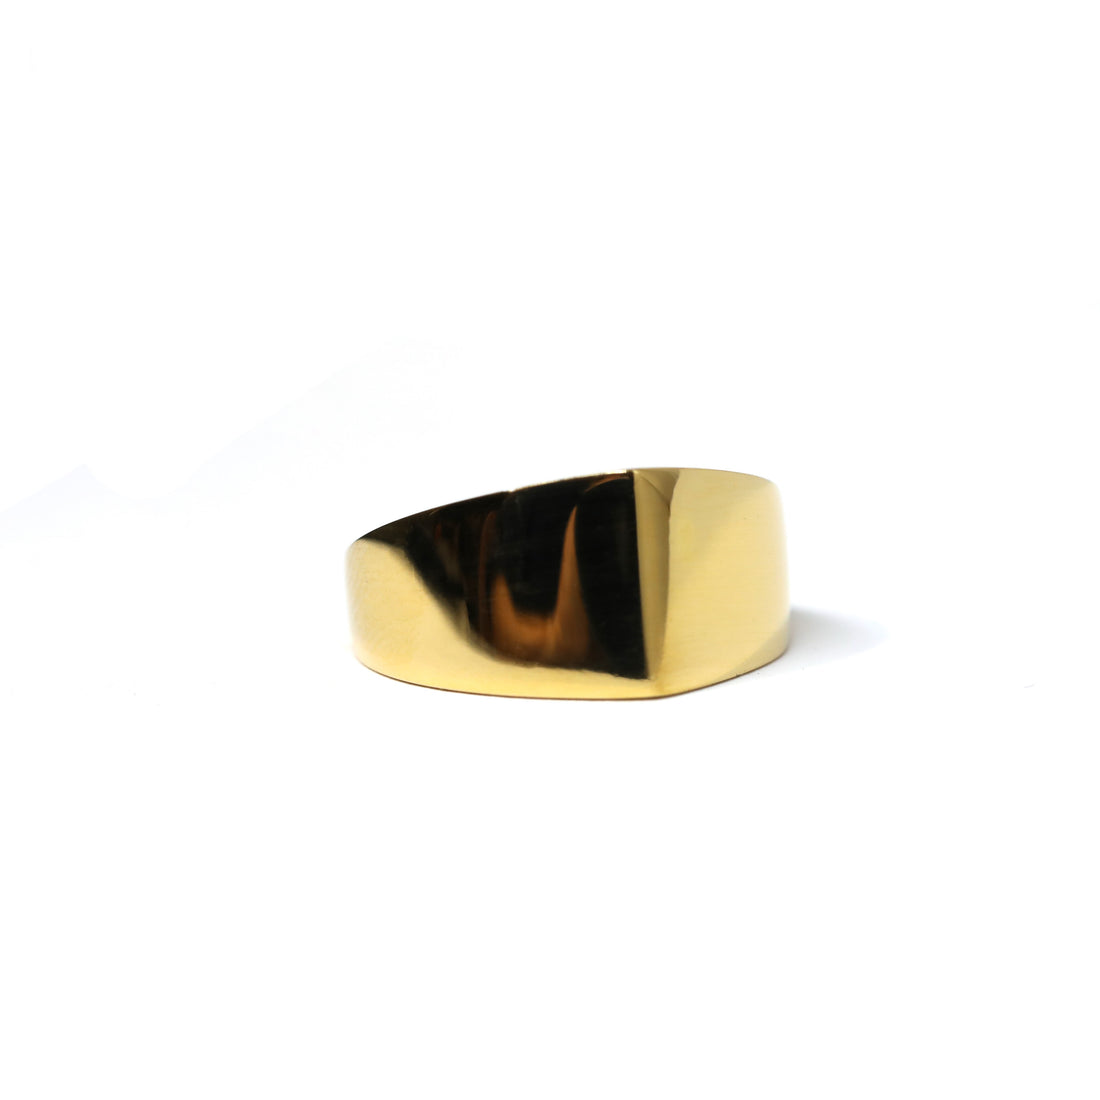 front view of bena jewelry montreal edgy ring vermeil gold jewelry monteal made in canada bold jewelry